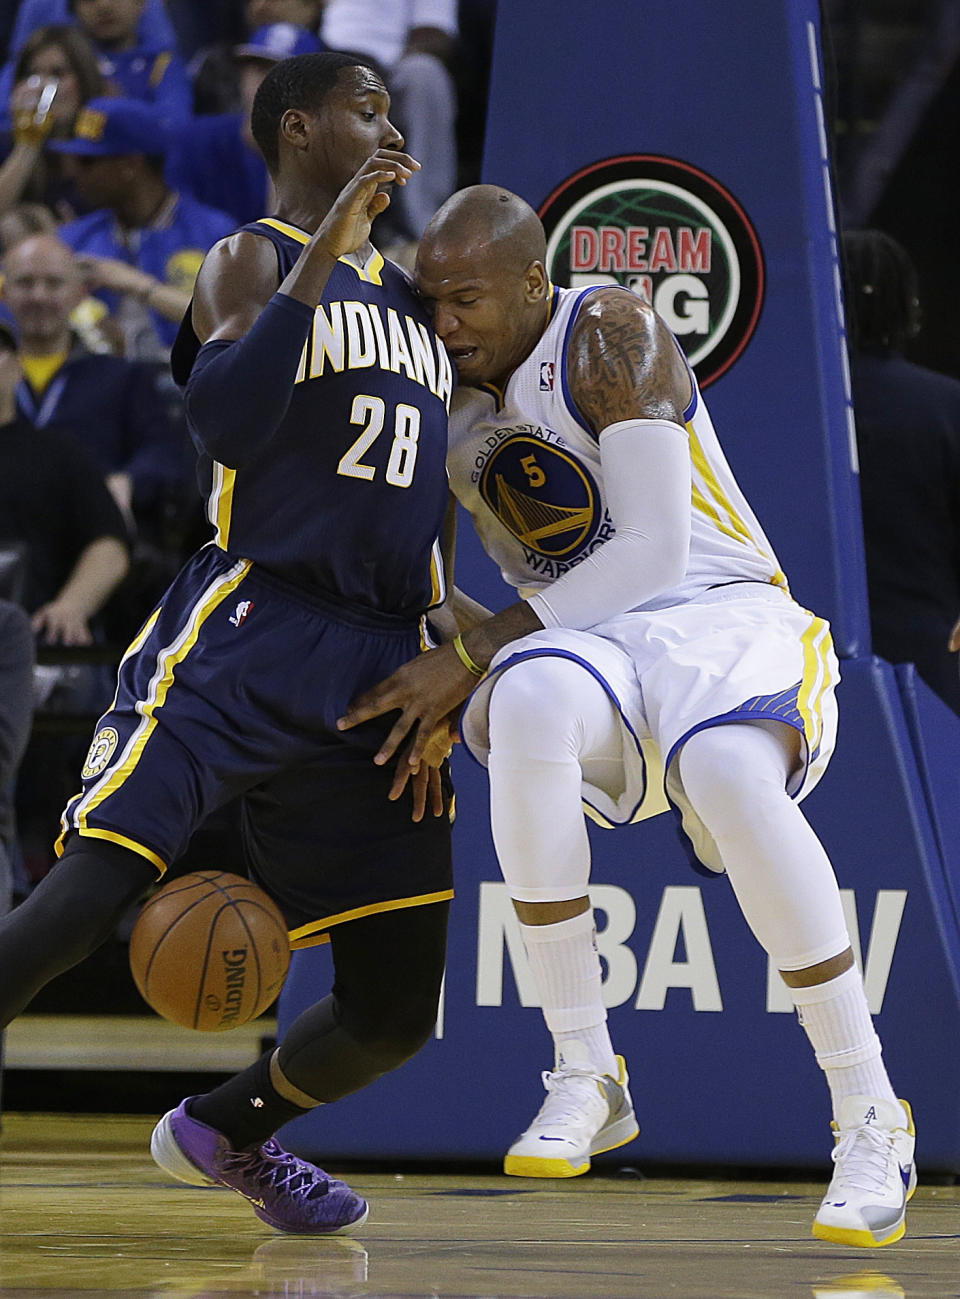 Golden State Warriors' Marreese Speights, right, loses the ball as he runs into Indiana Pacers' Ian Mahinmi (28) during the first half of an NBA basketball game, Monday, Jan. 20, 2014, in Oakland, Calif. (AP Photo/Ben Margot)